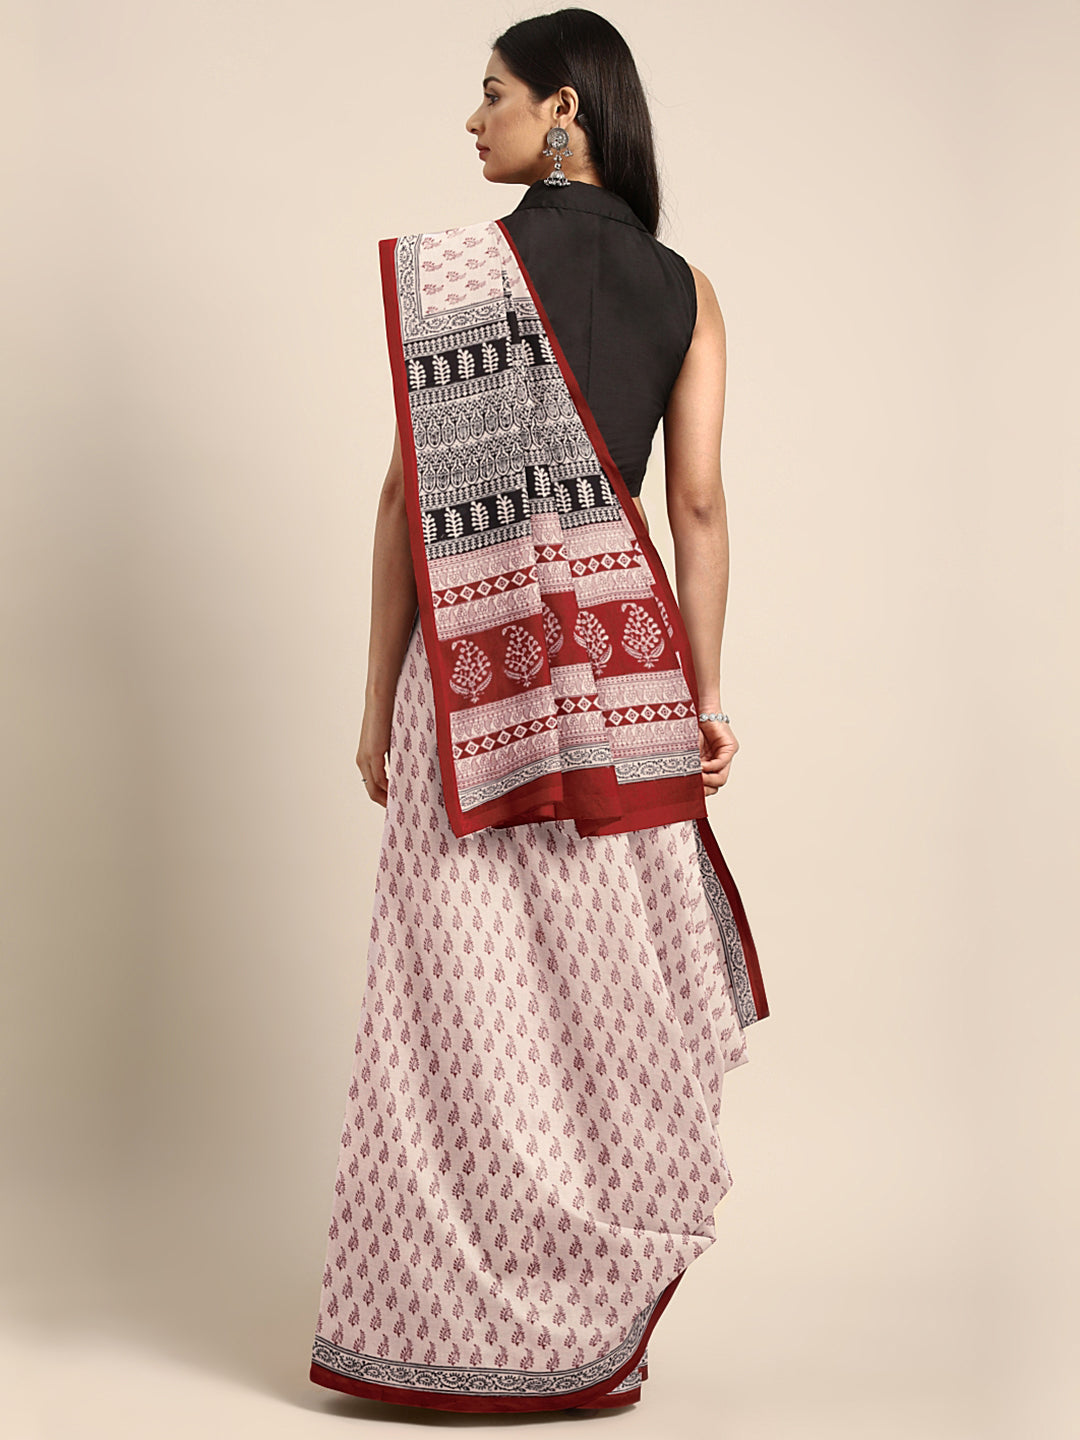 White and Red, Kalakari India Off-White & Maroon Printed Bagh Handloom Saree ZIBASA0109-Saree-Kalakari India-ZIBASA0109-Bagh, Cotton, Geographical Indication, Hand Crafted, Heritage Prints, Natural Dyes, Red, Sarees, Sustainable Fabrics, Woven, Yellow-[Linen,Ethnic,wear,Fashionista,Handloom,Handicraft,Indigo,blockprint,block,print,Cotton,Chanderi,Blue, latest,classy,party,bollywood,trendy,summer,style,traditional,formal,elegant,unique,style,hand,block,print, dabu,booti,gift,present,glamorous,aff